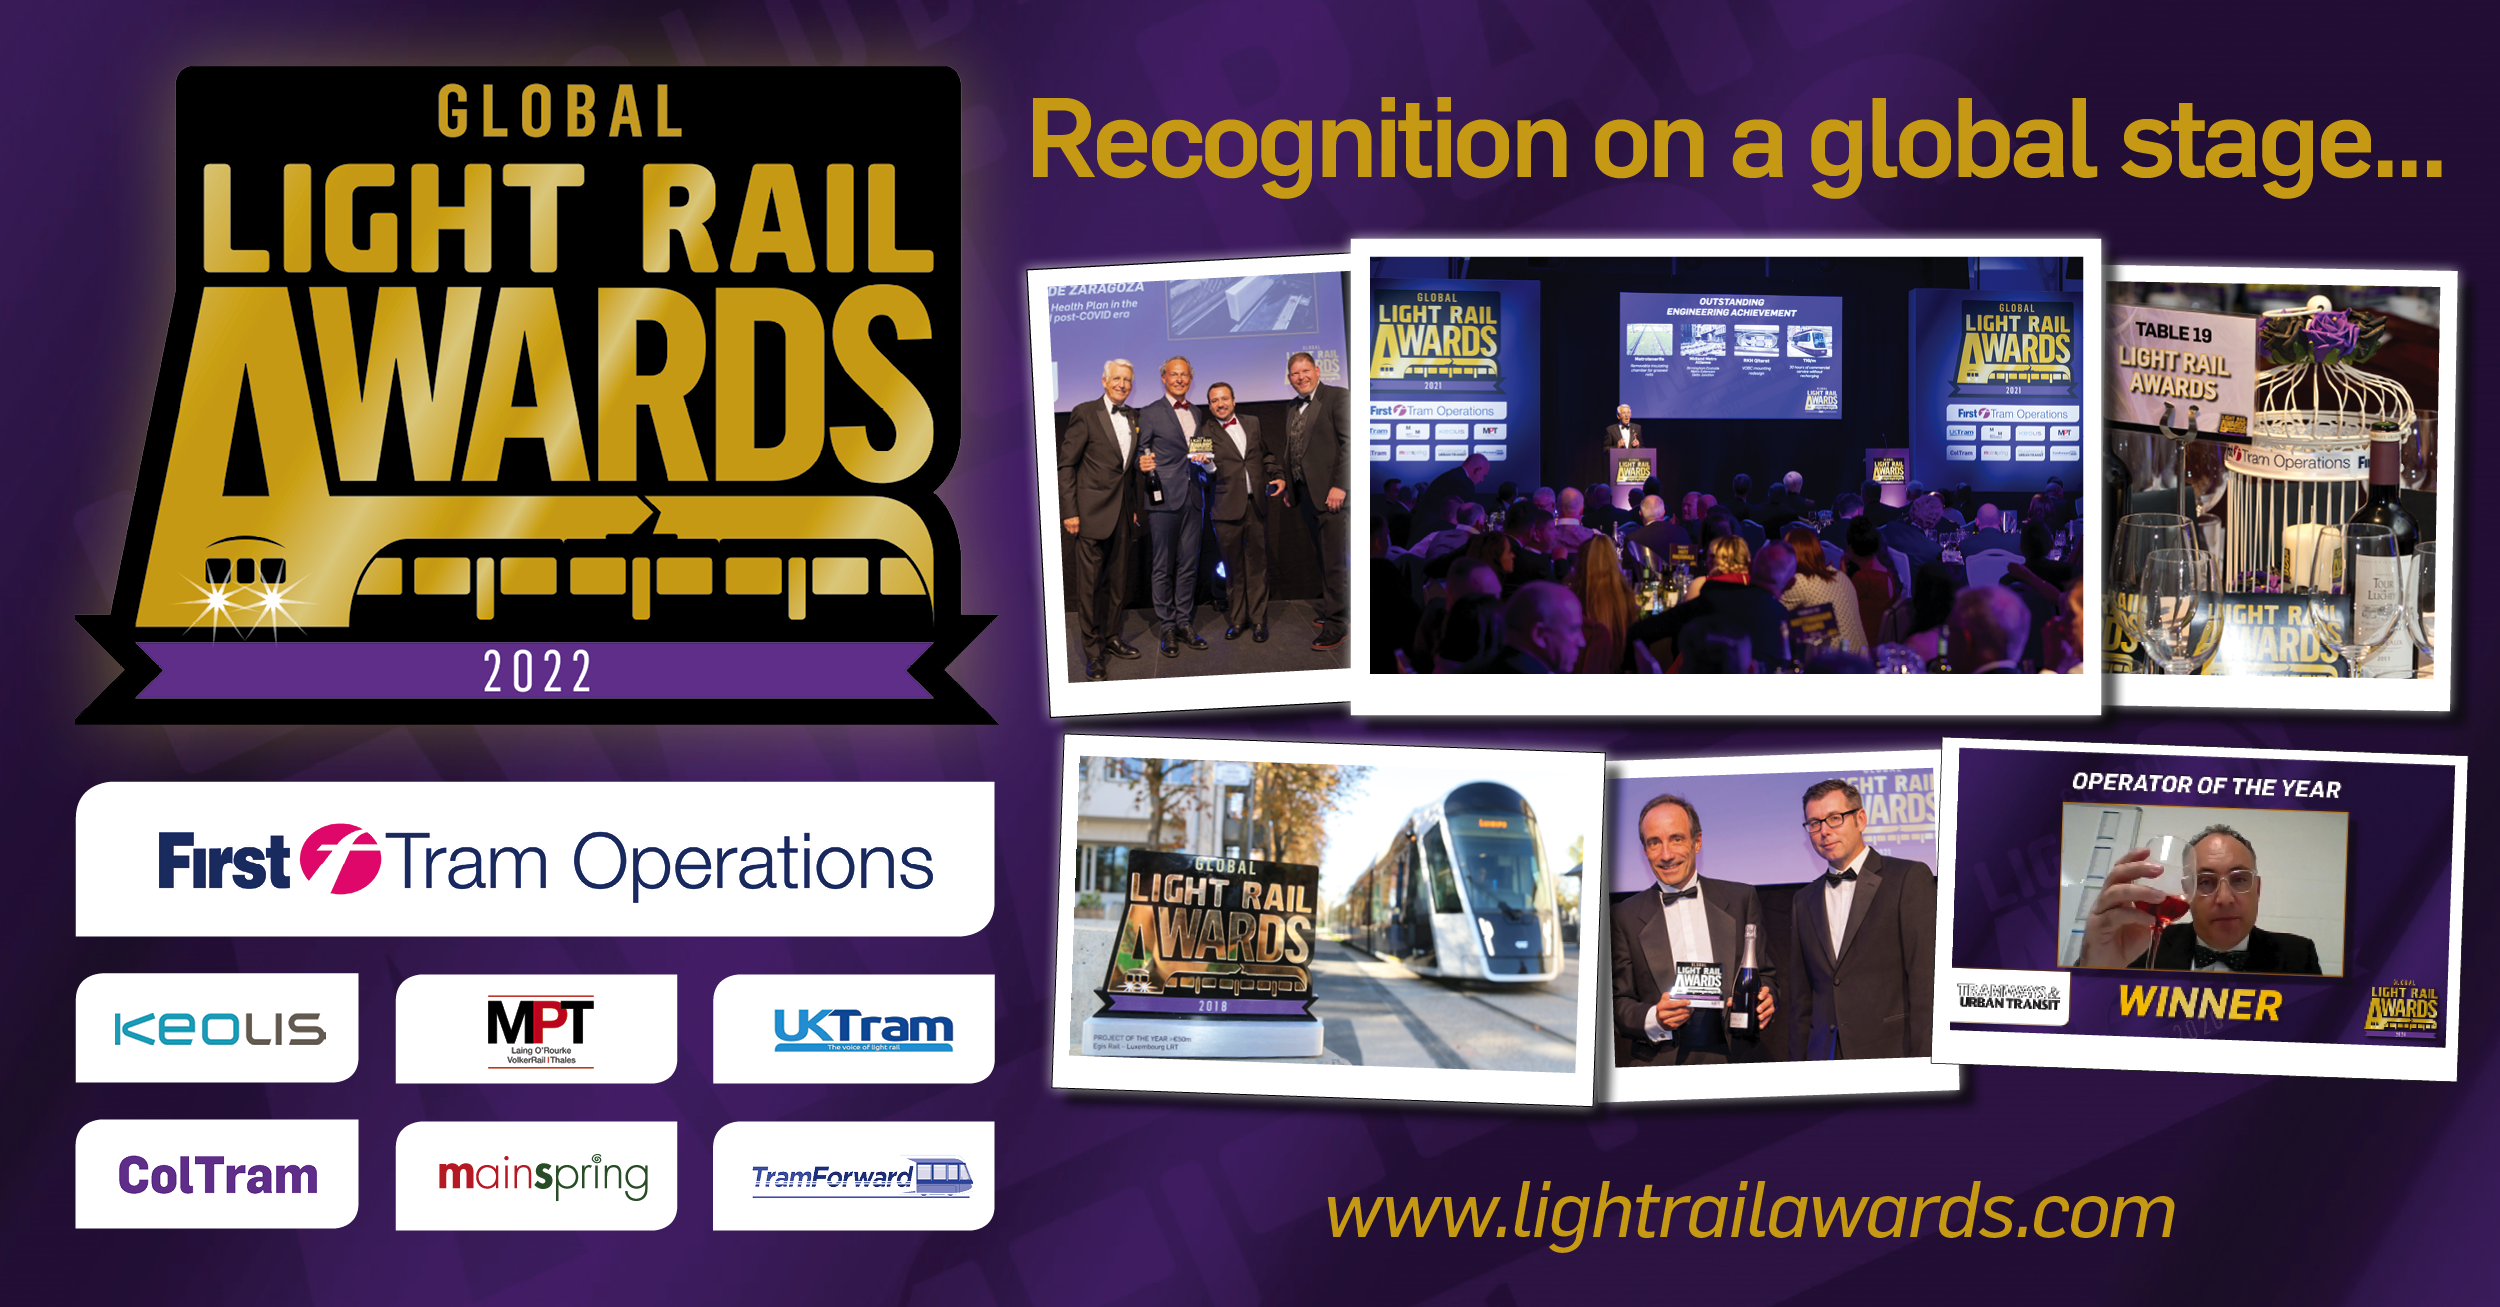 Less than a month to go for submissions for this year's Global Light Rail Awards | UK Tram